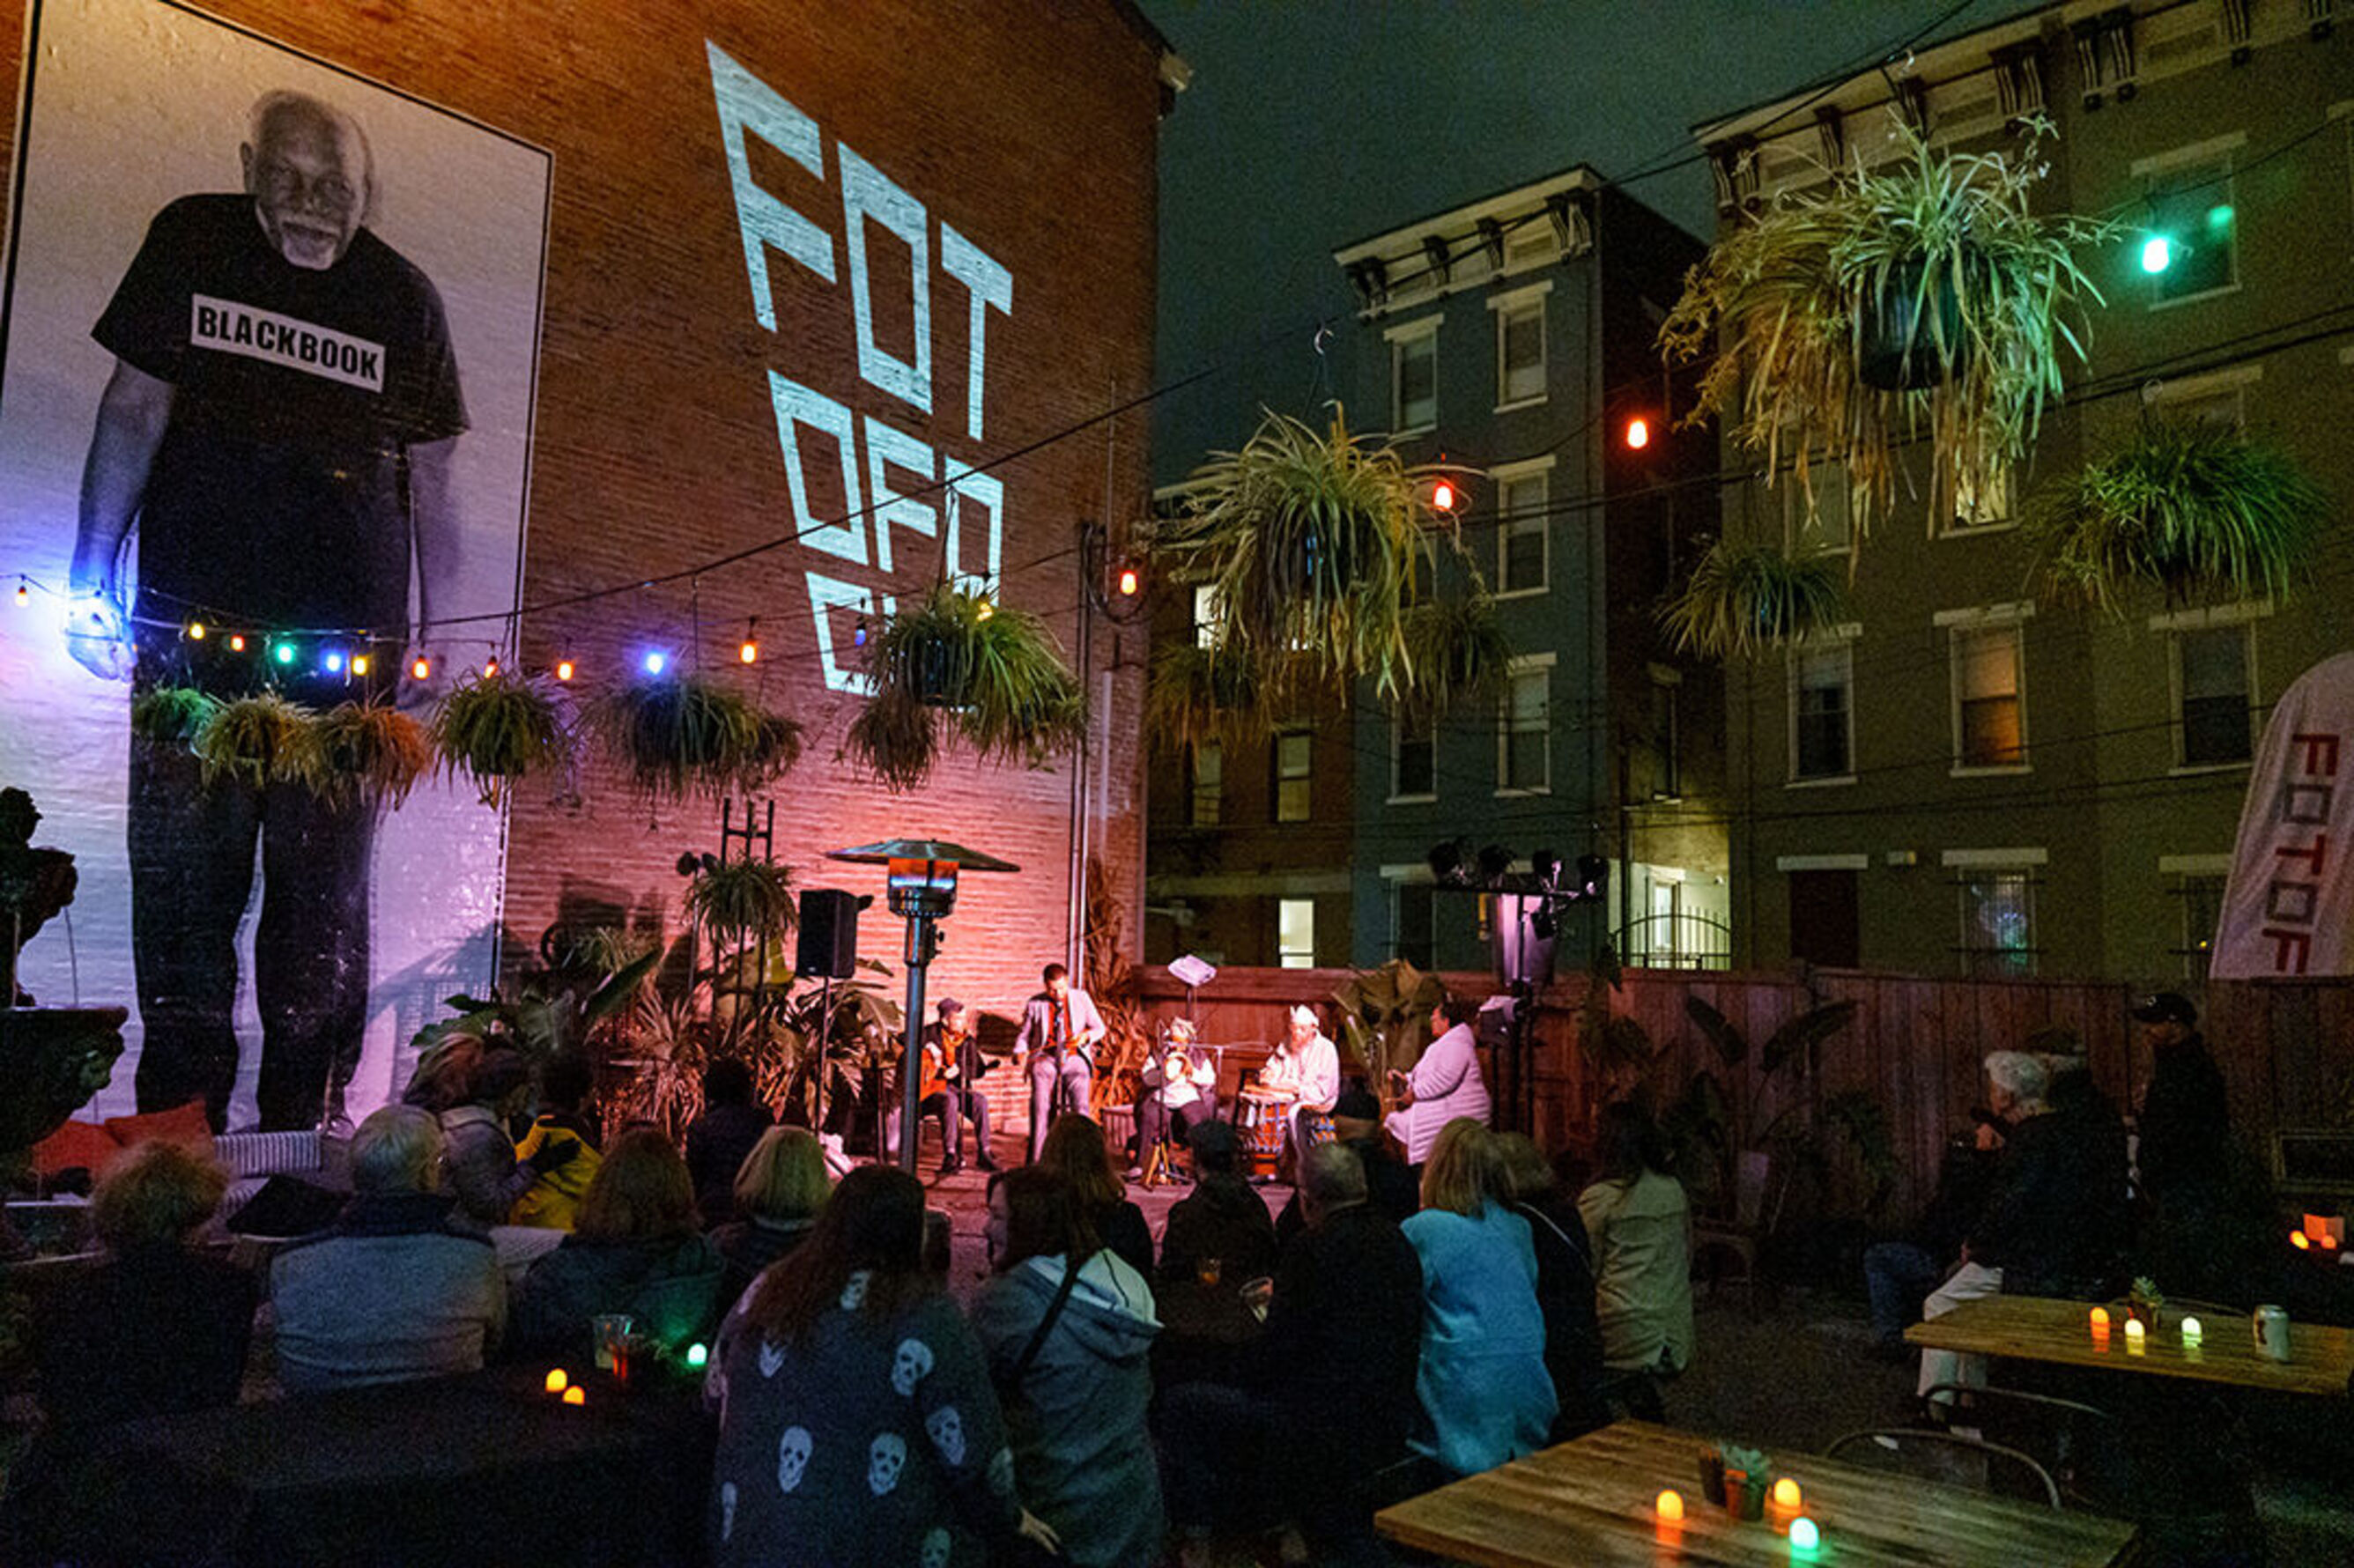 Musicians play together on a stage in the outdoor courtyard of a bar.